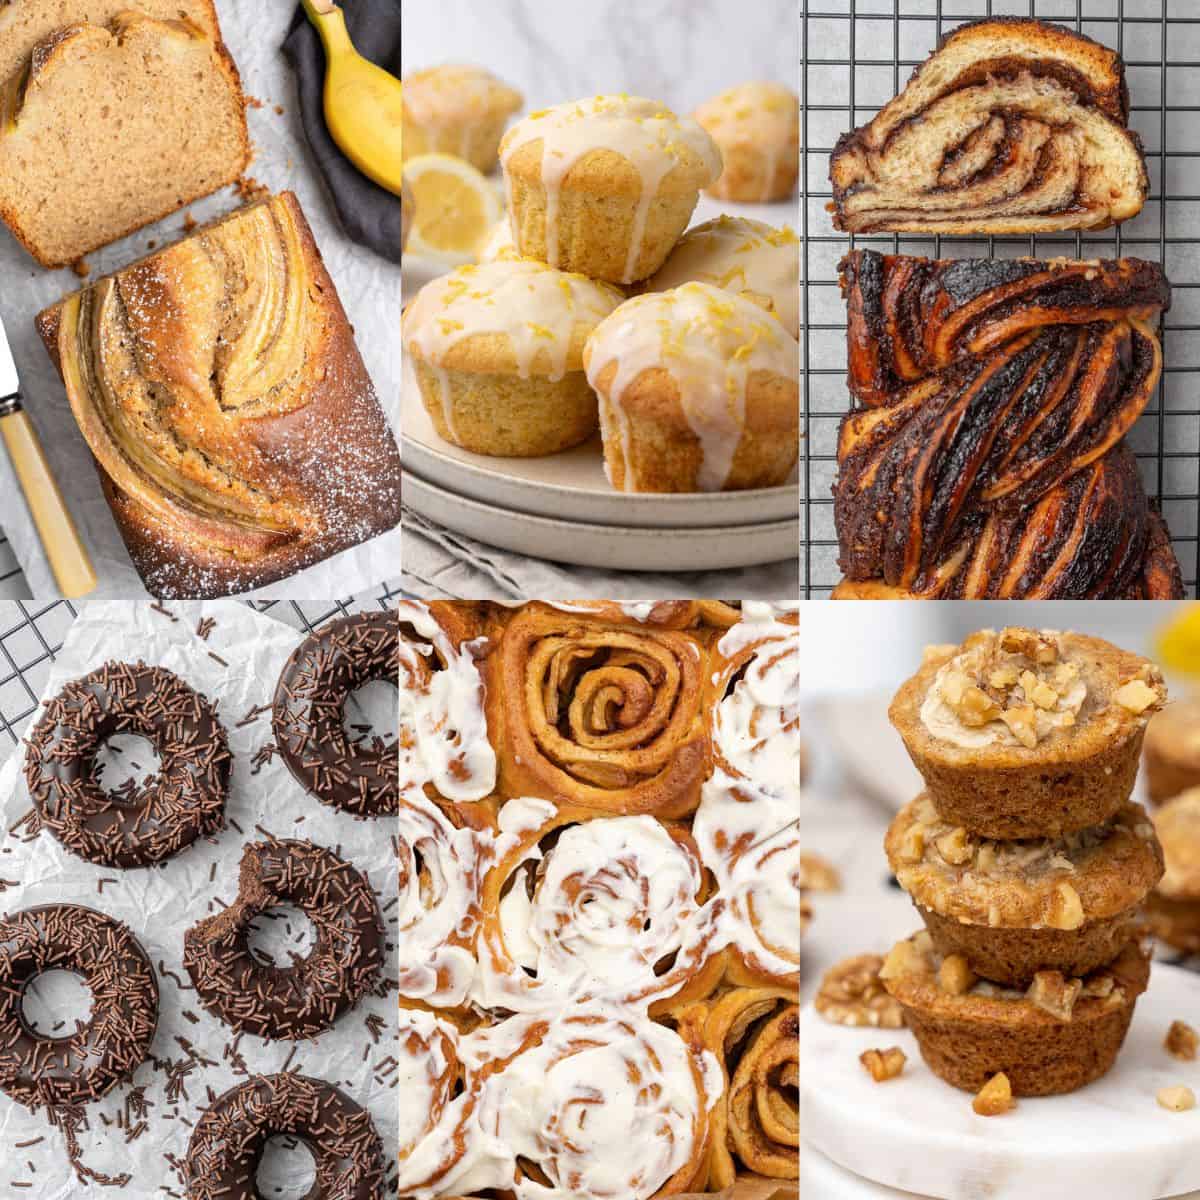 <p>If you find yourself with a sweet tooth first thing in the morning, the good news is you have plenty of easy <a href="https://www.spatuladesserts.com/sweet-breakfast-recipes/">sweet breakfast recipes</a> In this guide, we share 35 breakfast recipes that are irresistibly delicious and fun to make at home.</p><p><strong>Go to the recipes: <a href="https://www.spatuladesserts.com/sweet-breakfast-recipes/">Sweet Breakfast Recipes</a></strong></p><p><strong>This article was originally published as <a href="https://www.spatuladesserts.com/fall-desserts/">Best Fall Desserts</a> at <a href="http://www.spatuladesserts.com">Spatula Desserts</a>.</strong></p>